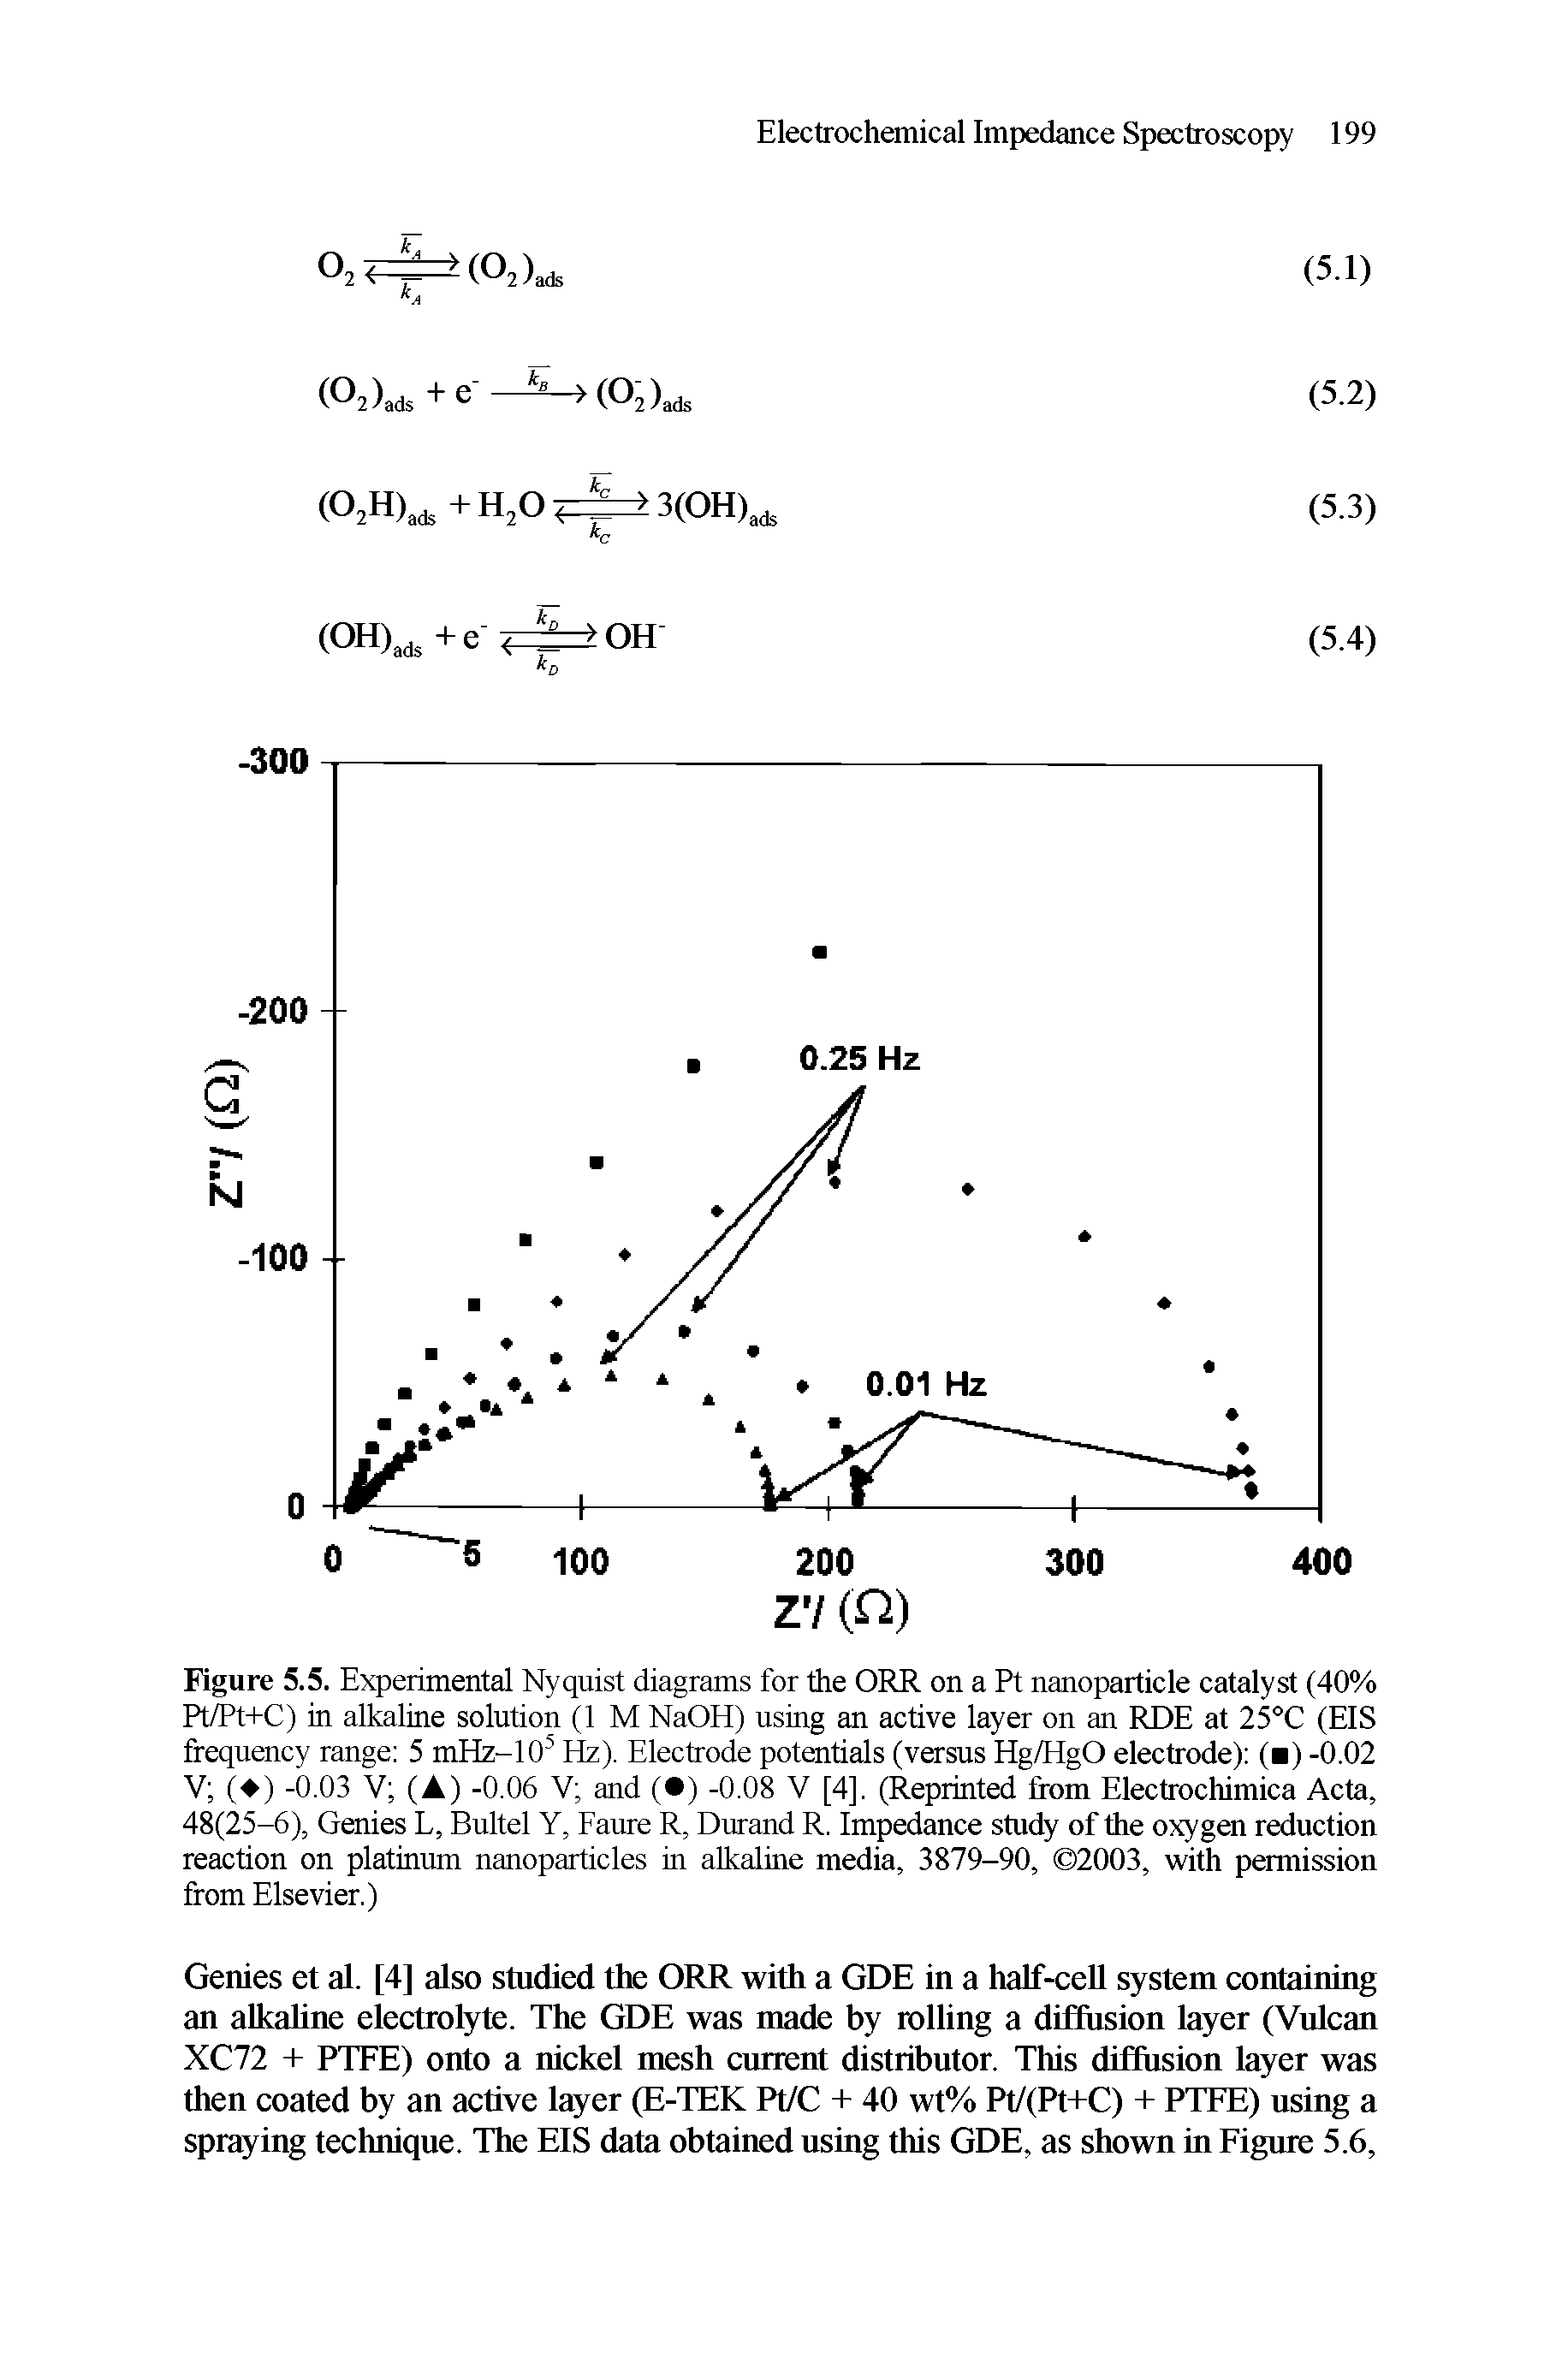 Figure 5.5. Experimental Nyquist diagrams for the ORR on a Pt nanoparticle catalyst (40% Pt/Pt+C) in alkaline solution (1 M NaOH) using an active layer on an RDE at 25°C (EIS frequency range 5 mHz-105 Hz). Electrode potentials (versus Hg/HgO electrode) ( ) -0.02 V ( ) -0.03 V (A) -0.06 V and ( ) -0.08 V [4], (Reprinted from Electrochimica Acta, 48(25-6), Genies L, Bultel Y, Faure R, Durand R. Impedance study of the oxygen reduction reaction on platinum nanoparticles in alkaline media, 3879-90, 2003, with permission from Elsevier.)...